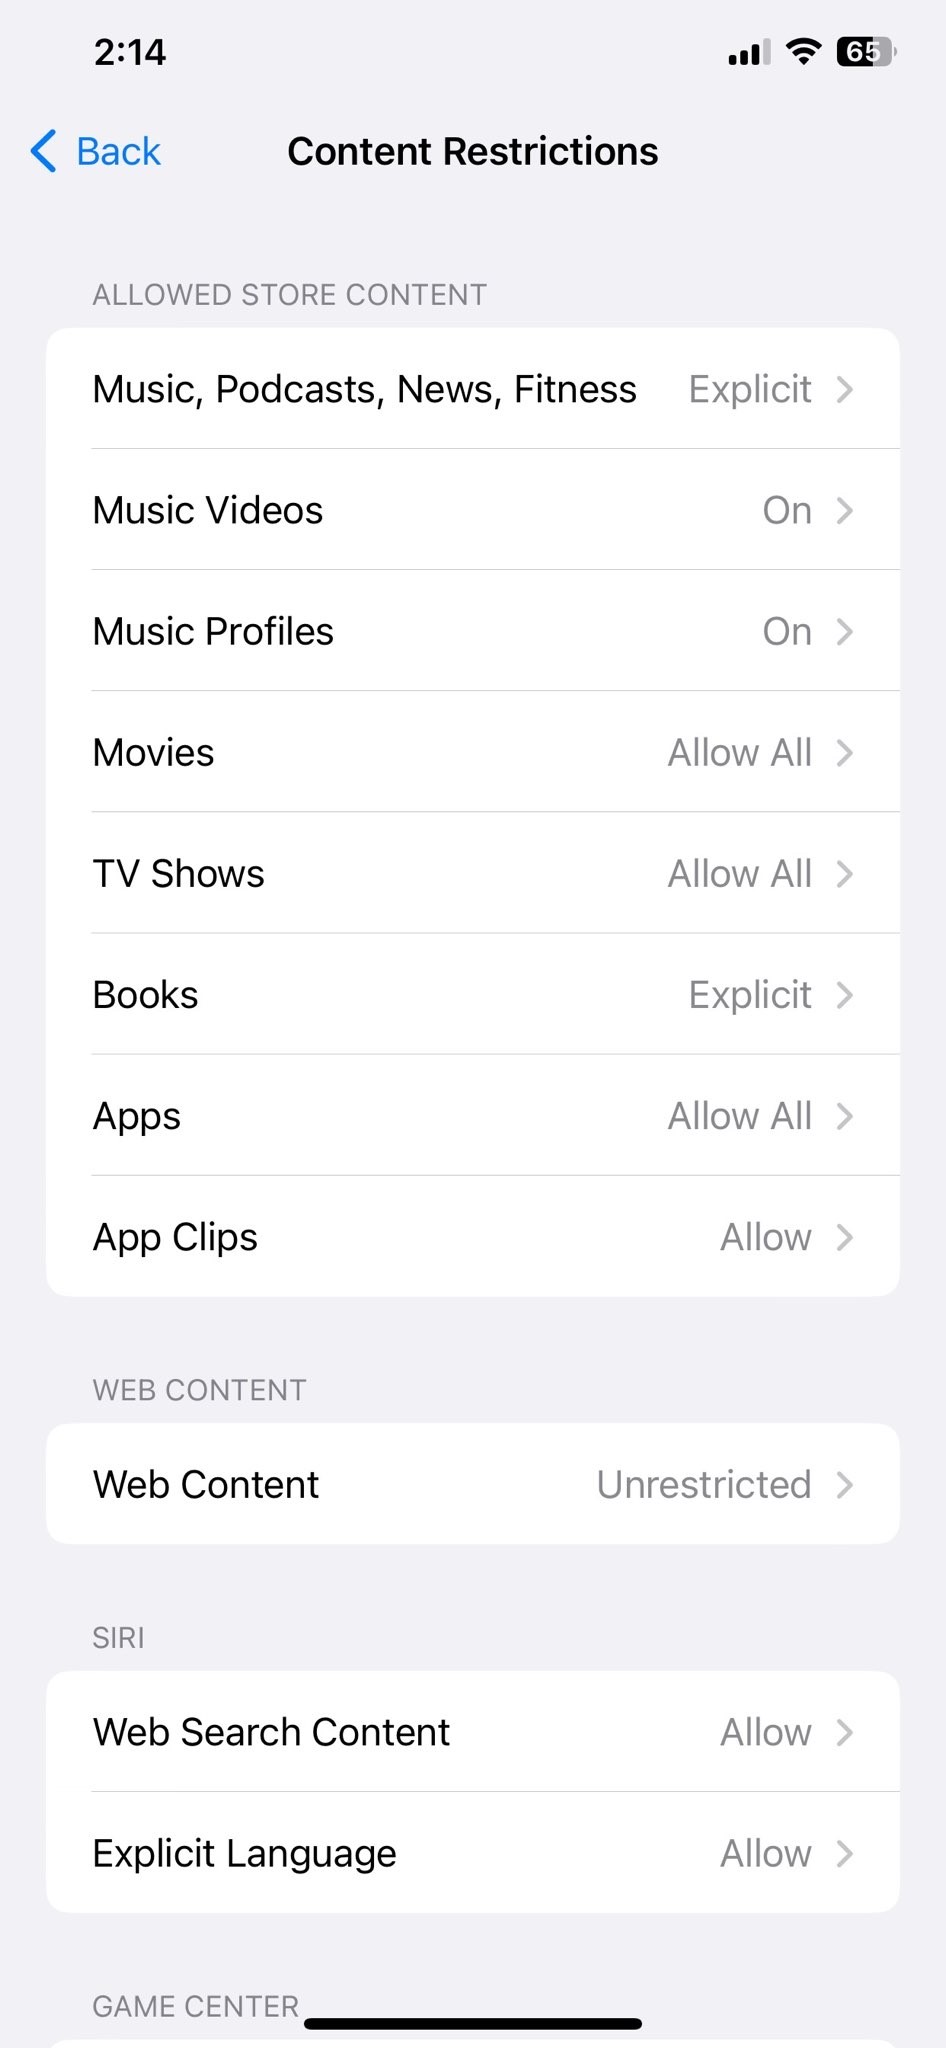 For apps, tap 'Apps' and select an age limit 